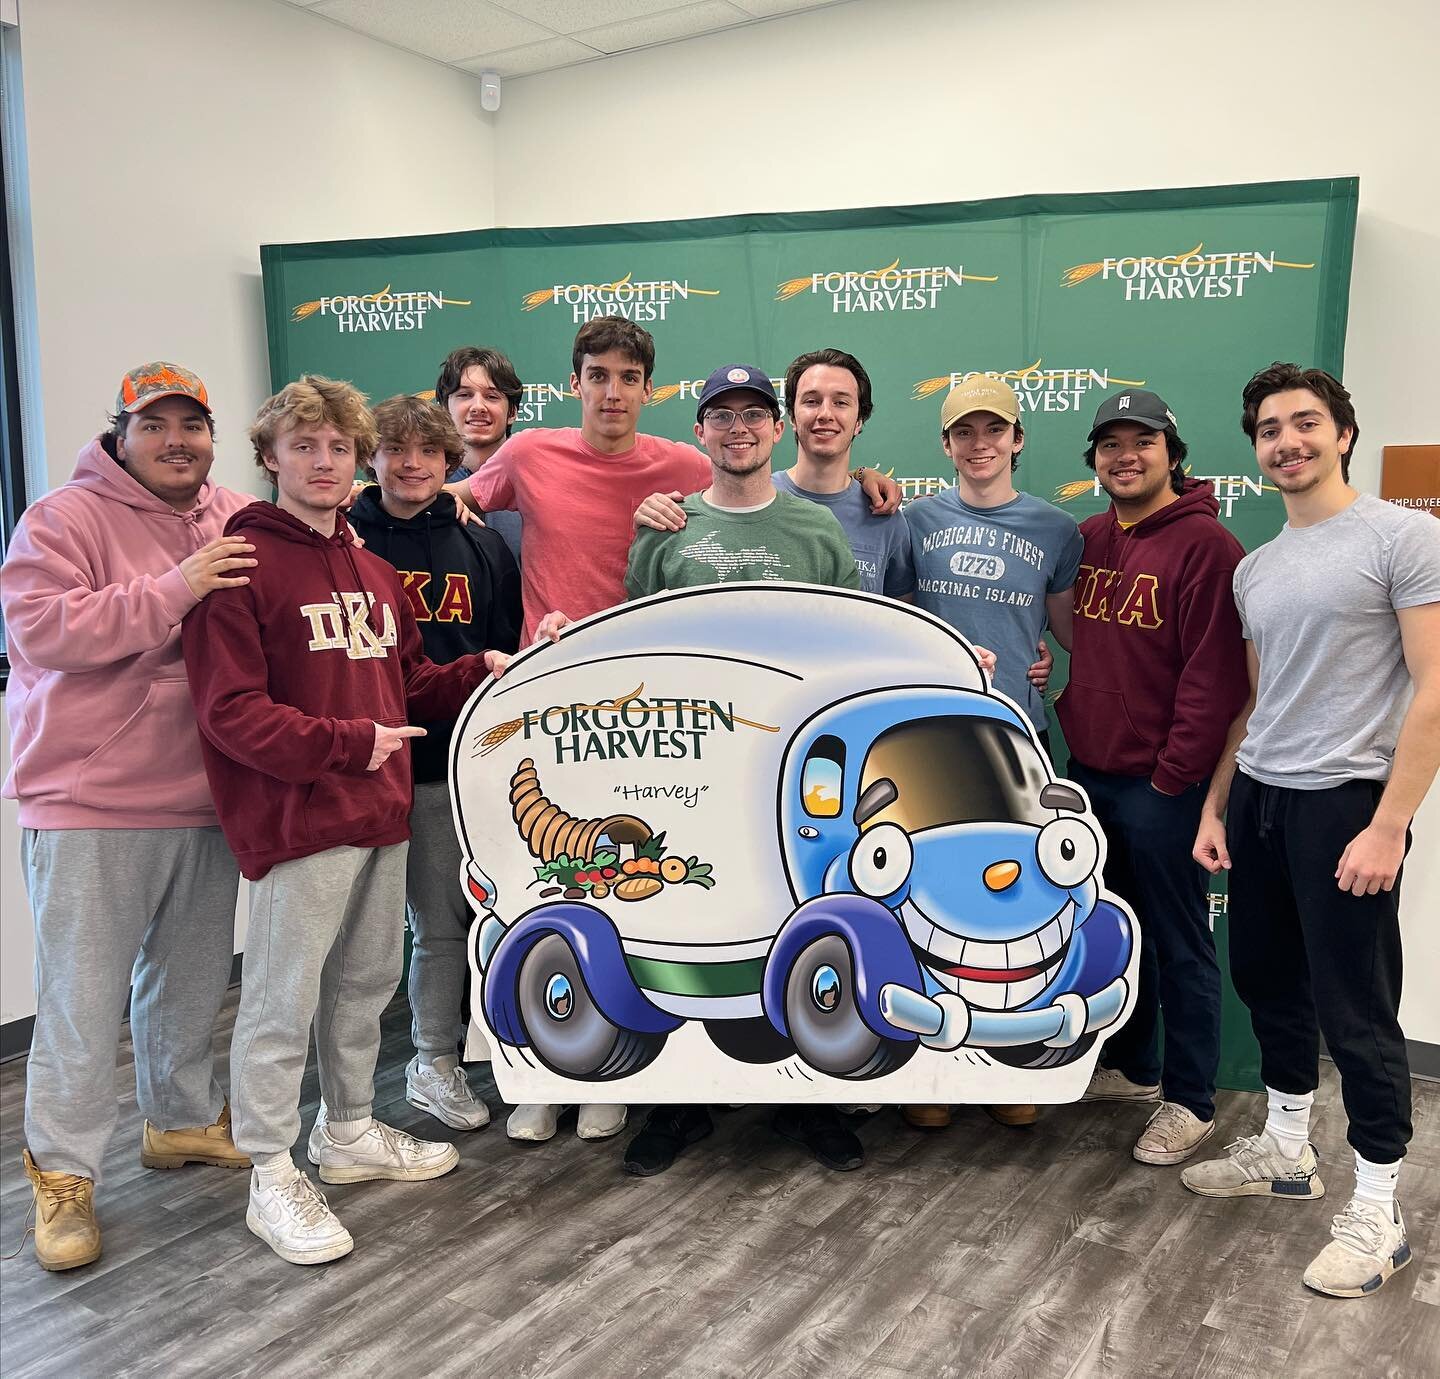 This weekend our brothers volunteered their time at Forgotten Harvest, during this time we were able to package 5,962 pounds of groceries, 17280 pounds of eggs, 360 boxes of food for families in need. In total we were collectively able to gather 23,6